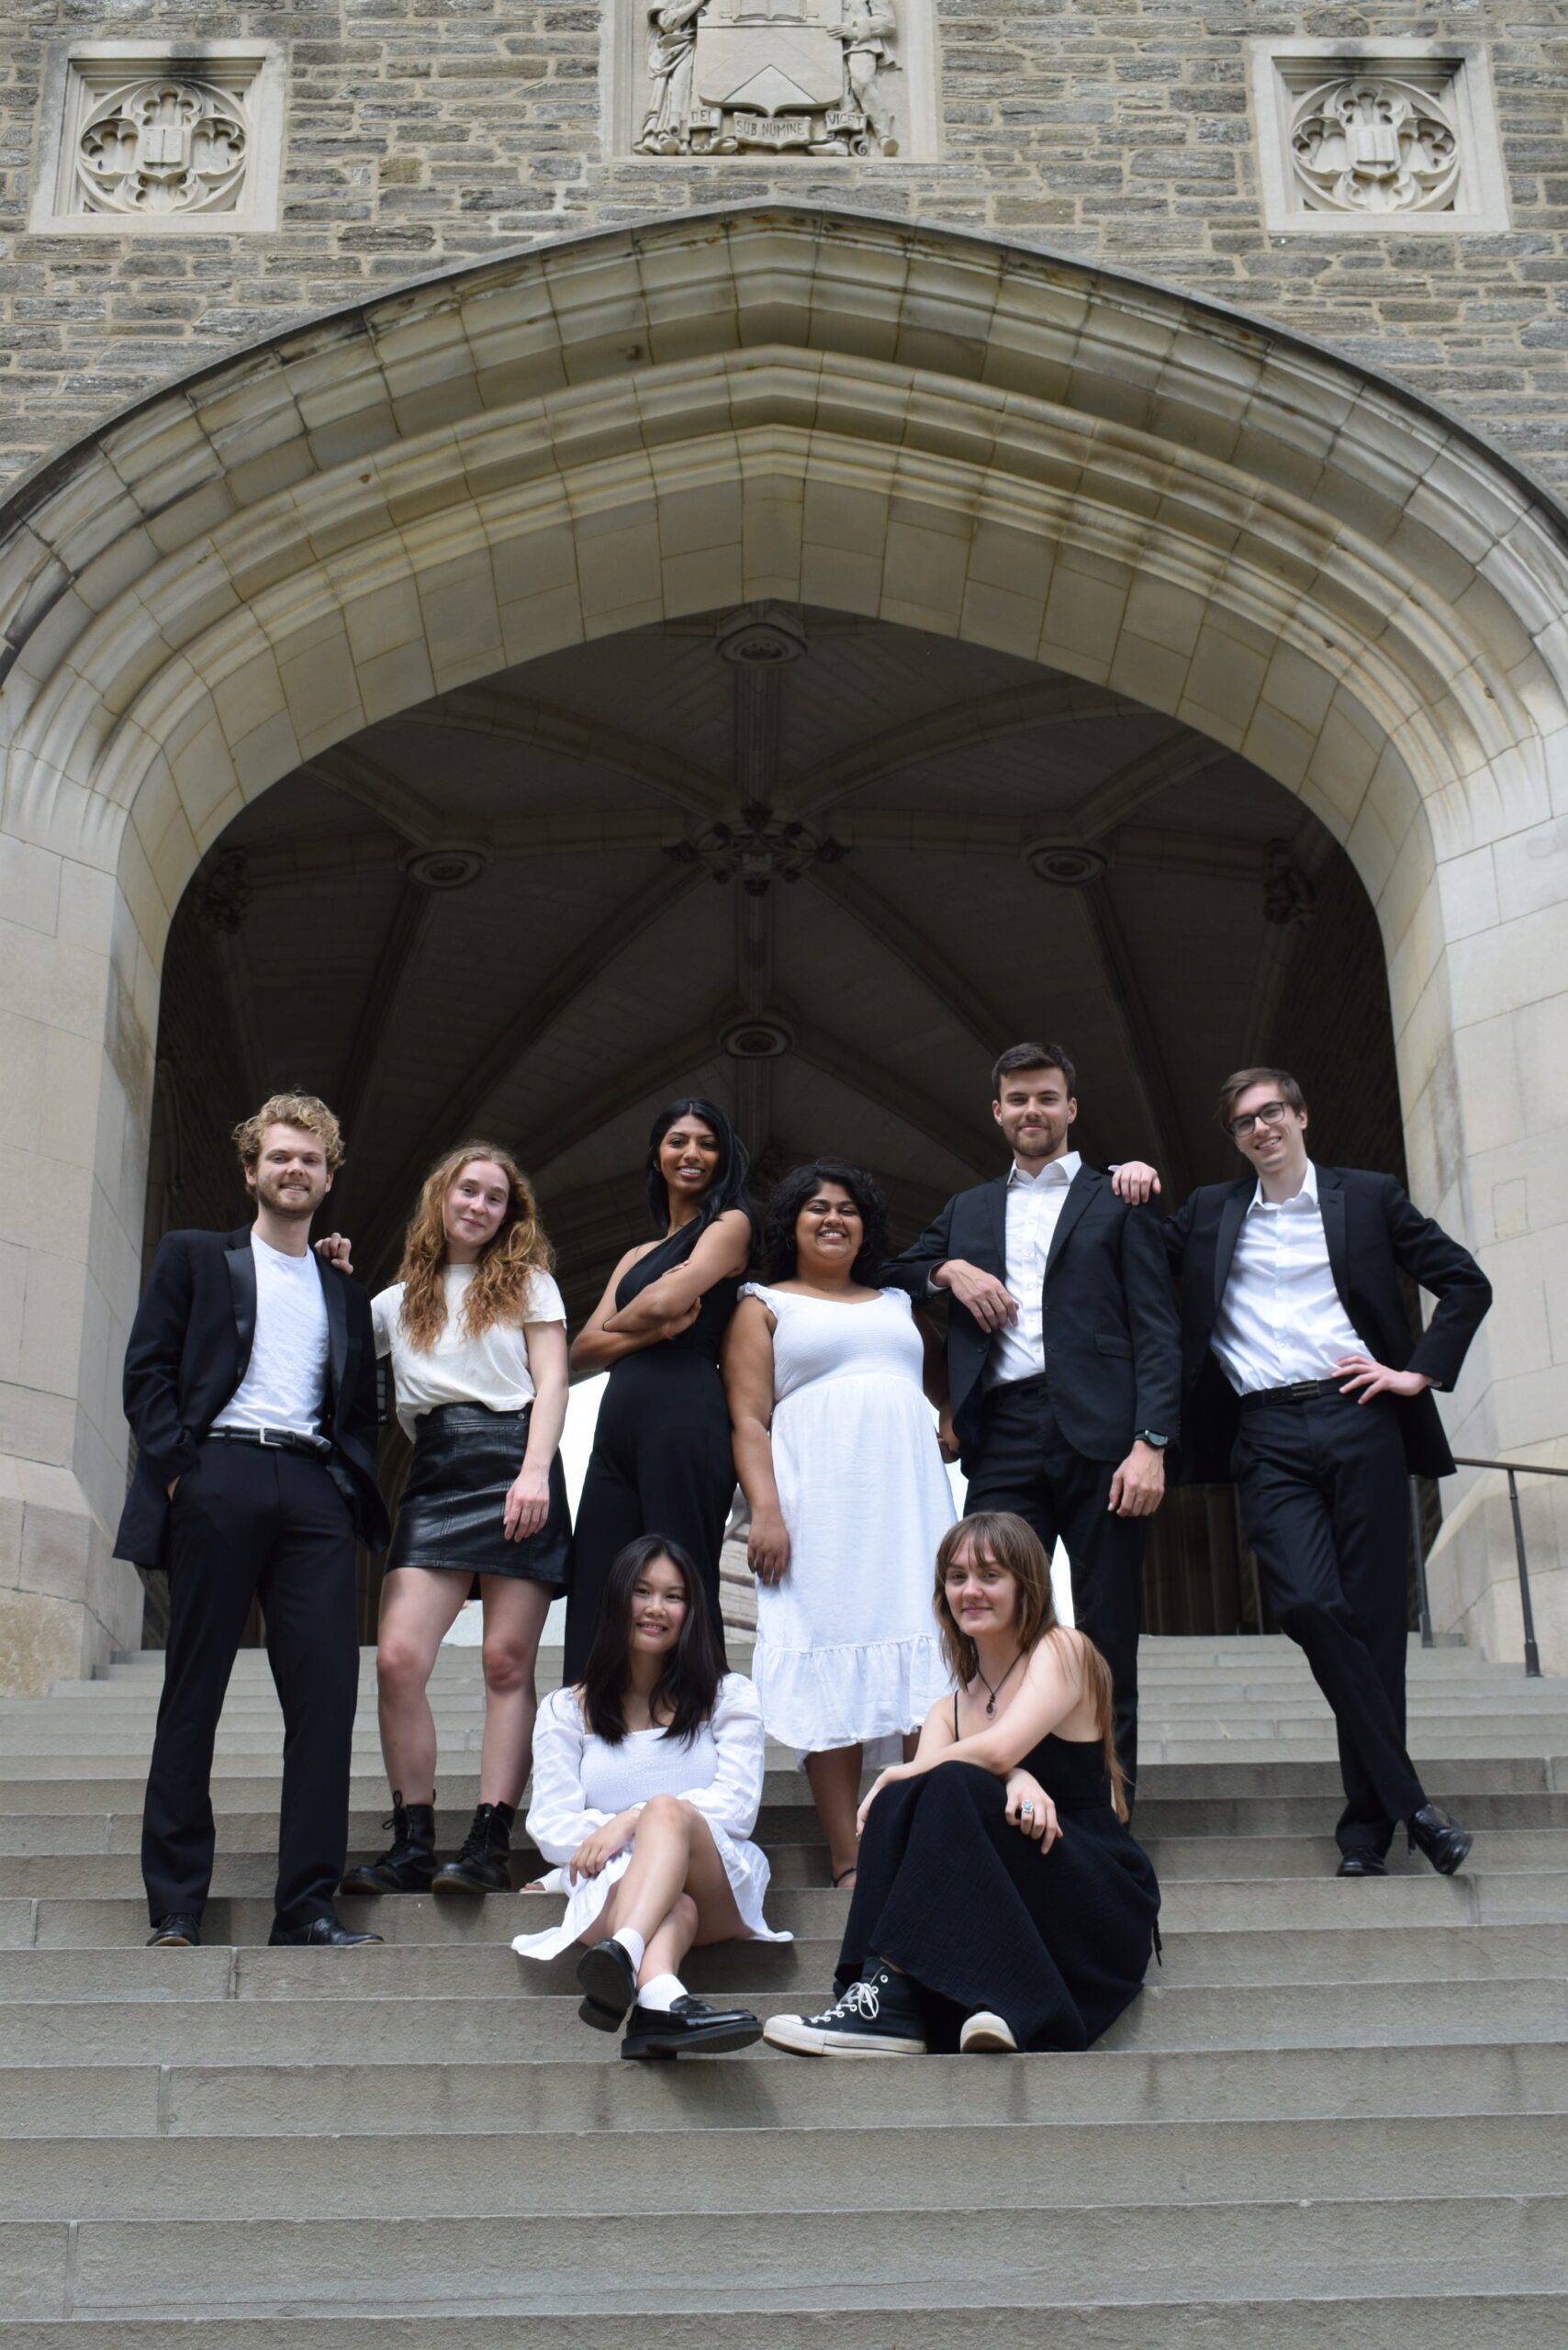 Student vocalists standing and smiling under a concrete arch on campus